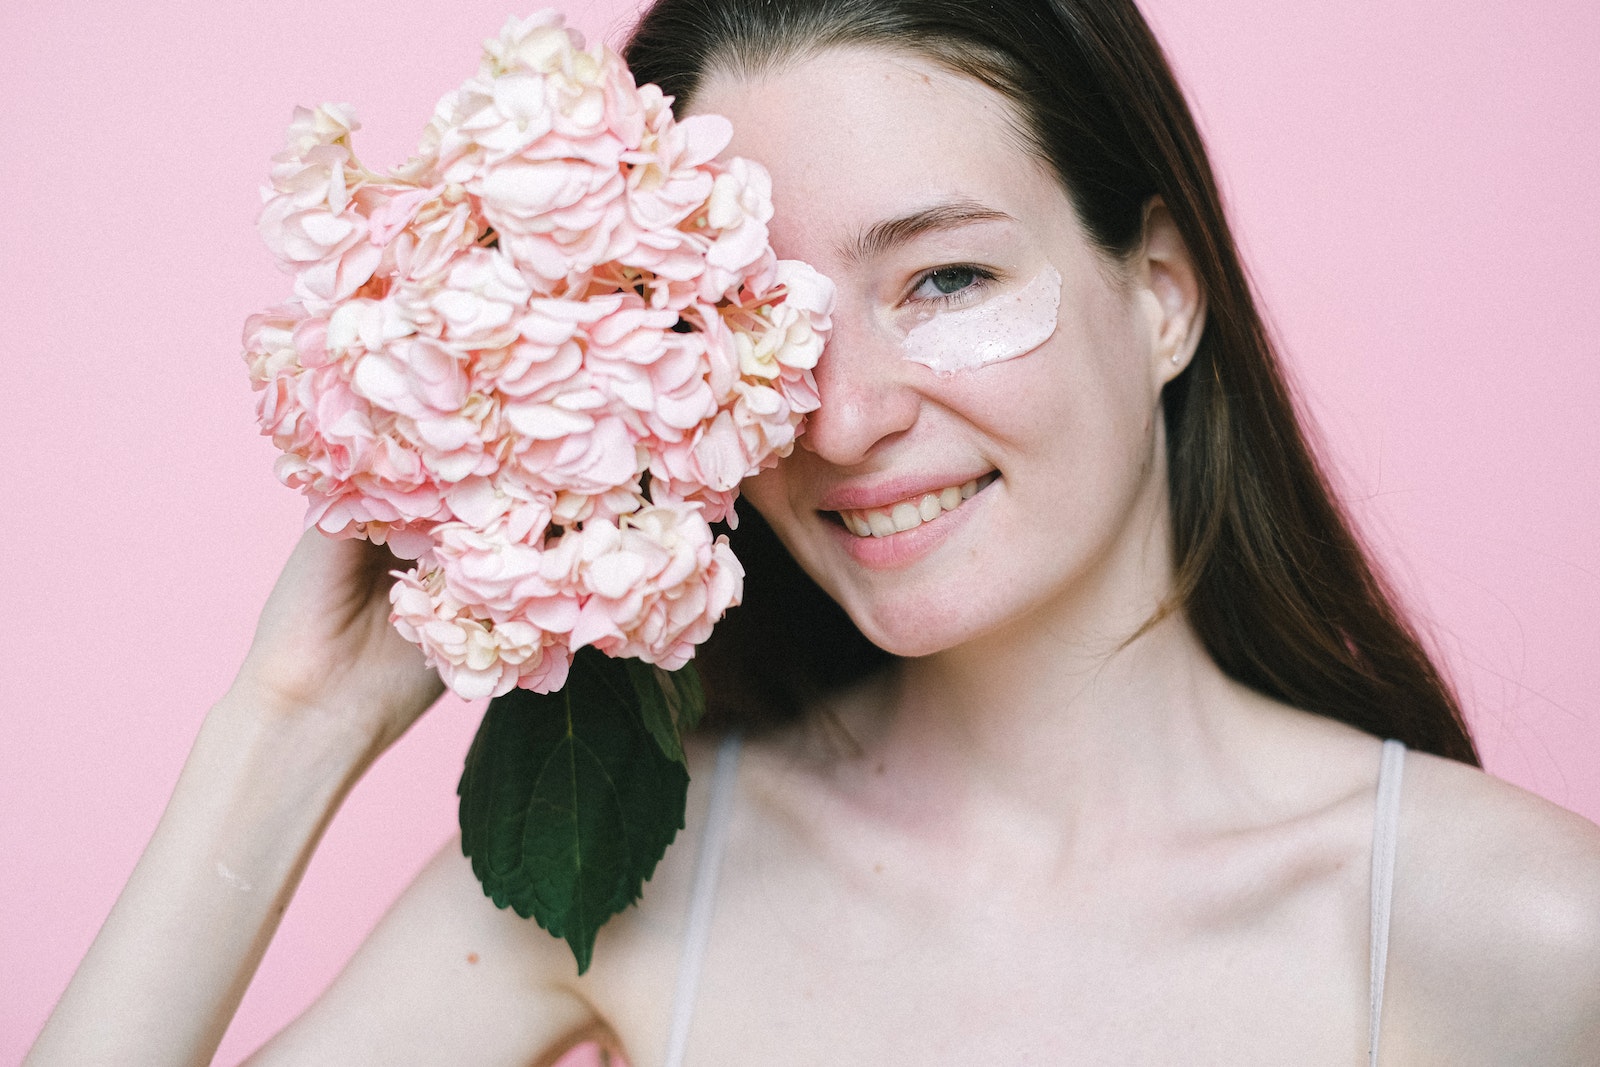 Smiling woman covering eye with pink flower while standing against pink background